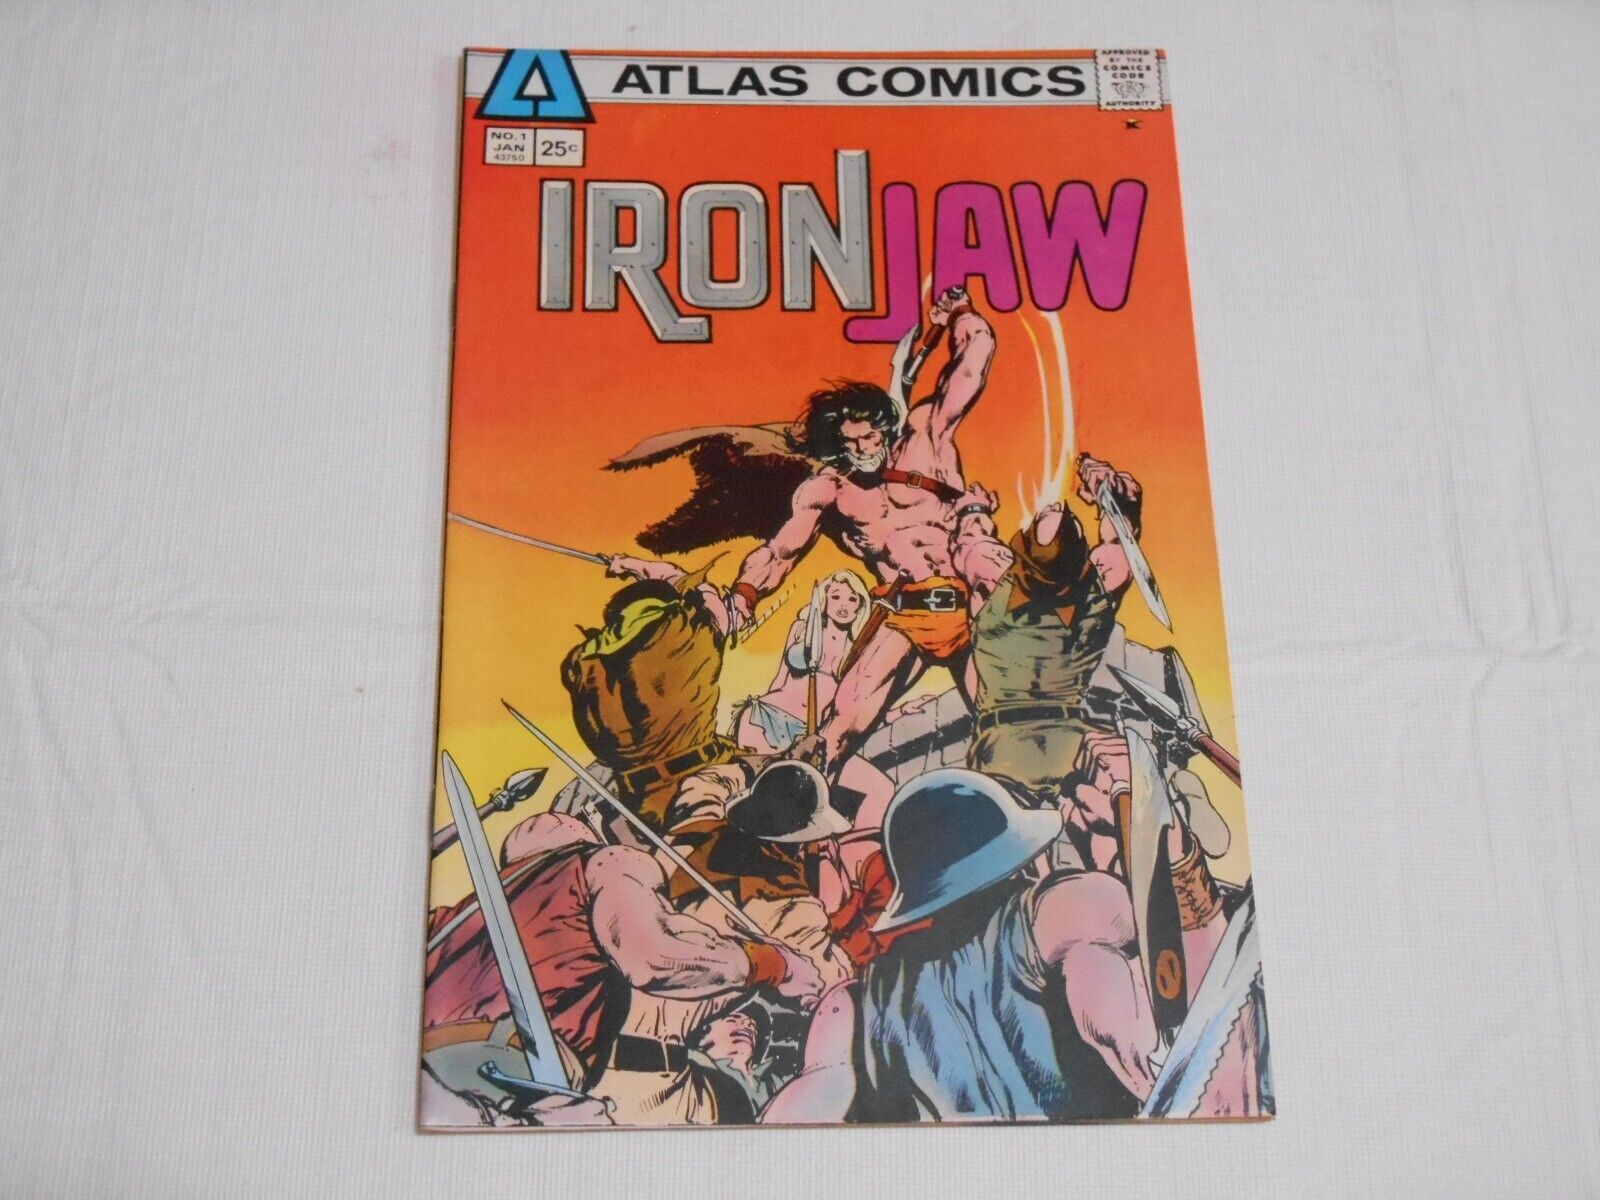 Iron Jaw #1-4, (Atlas), 6.0 FN to 7.5 VF-